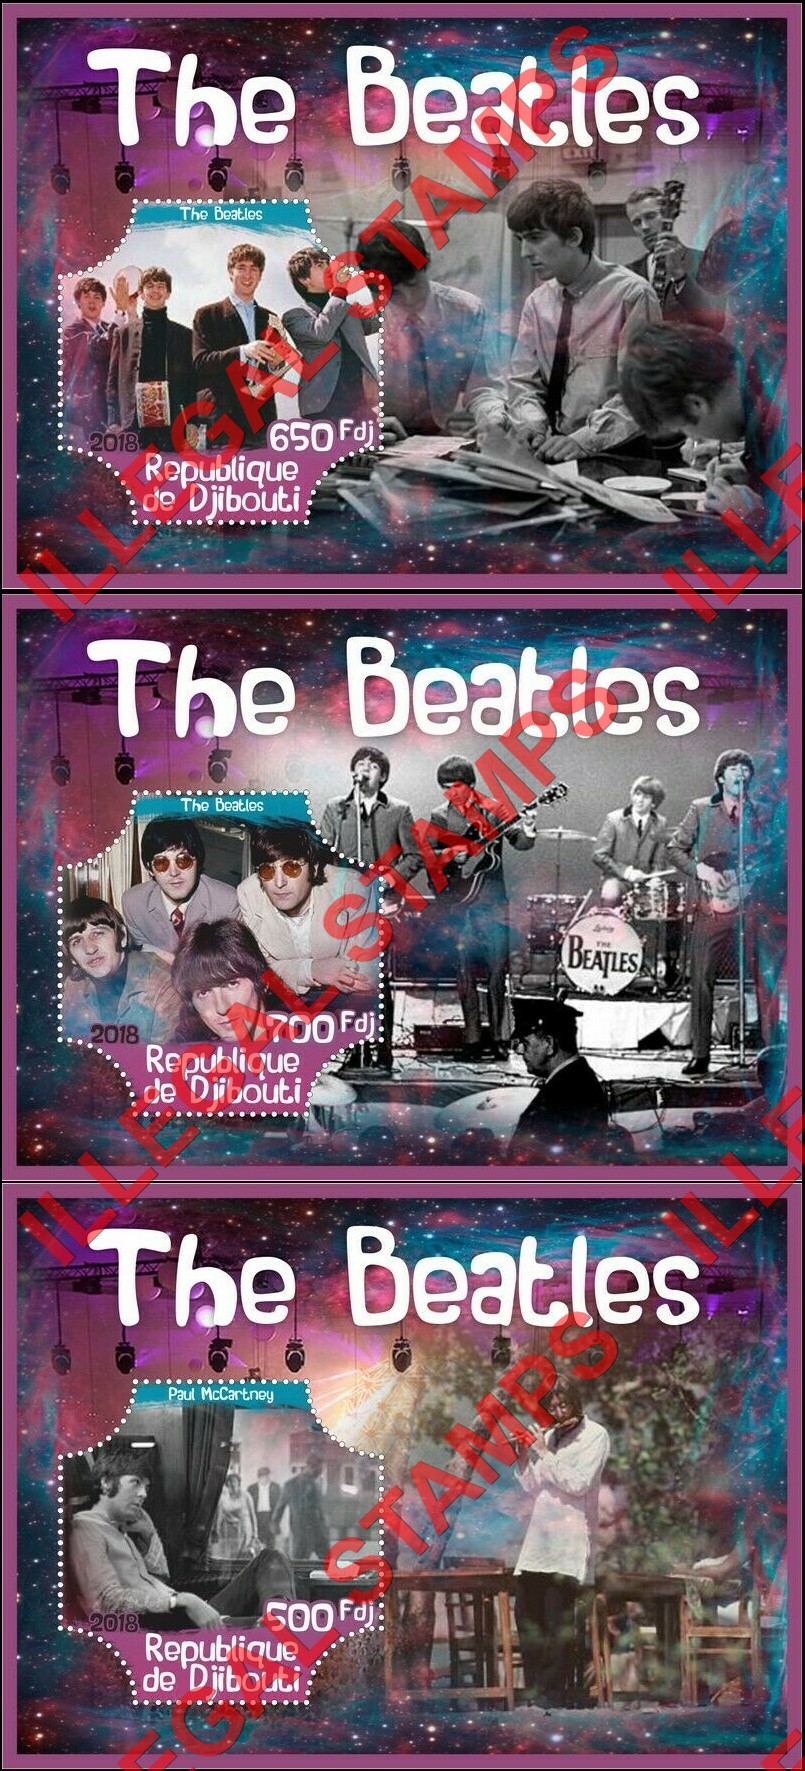 Djibouti 2018 The Beatles Illegal Stamp Souvenir Sheets of 1 (Part 1)